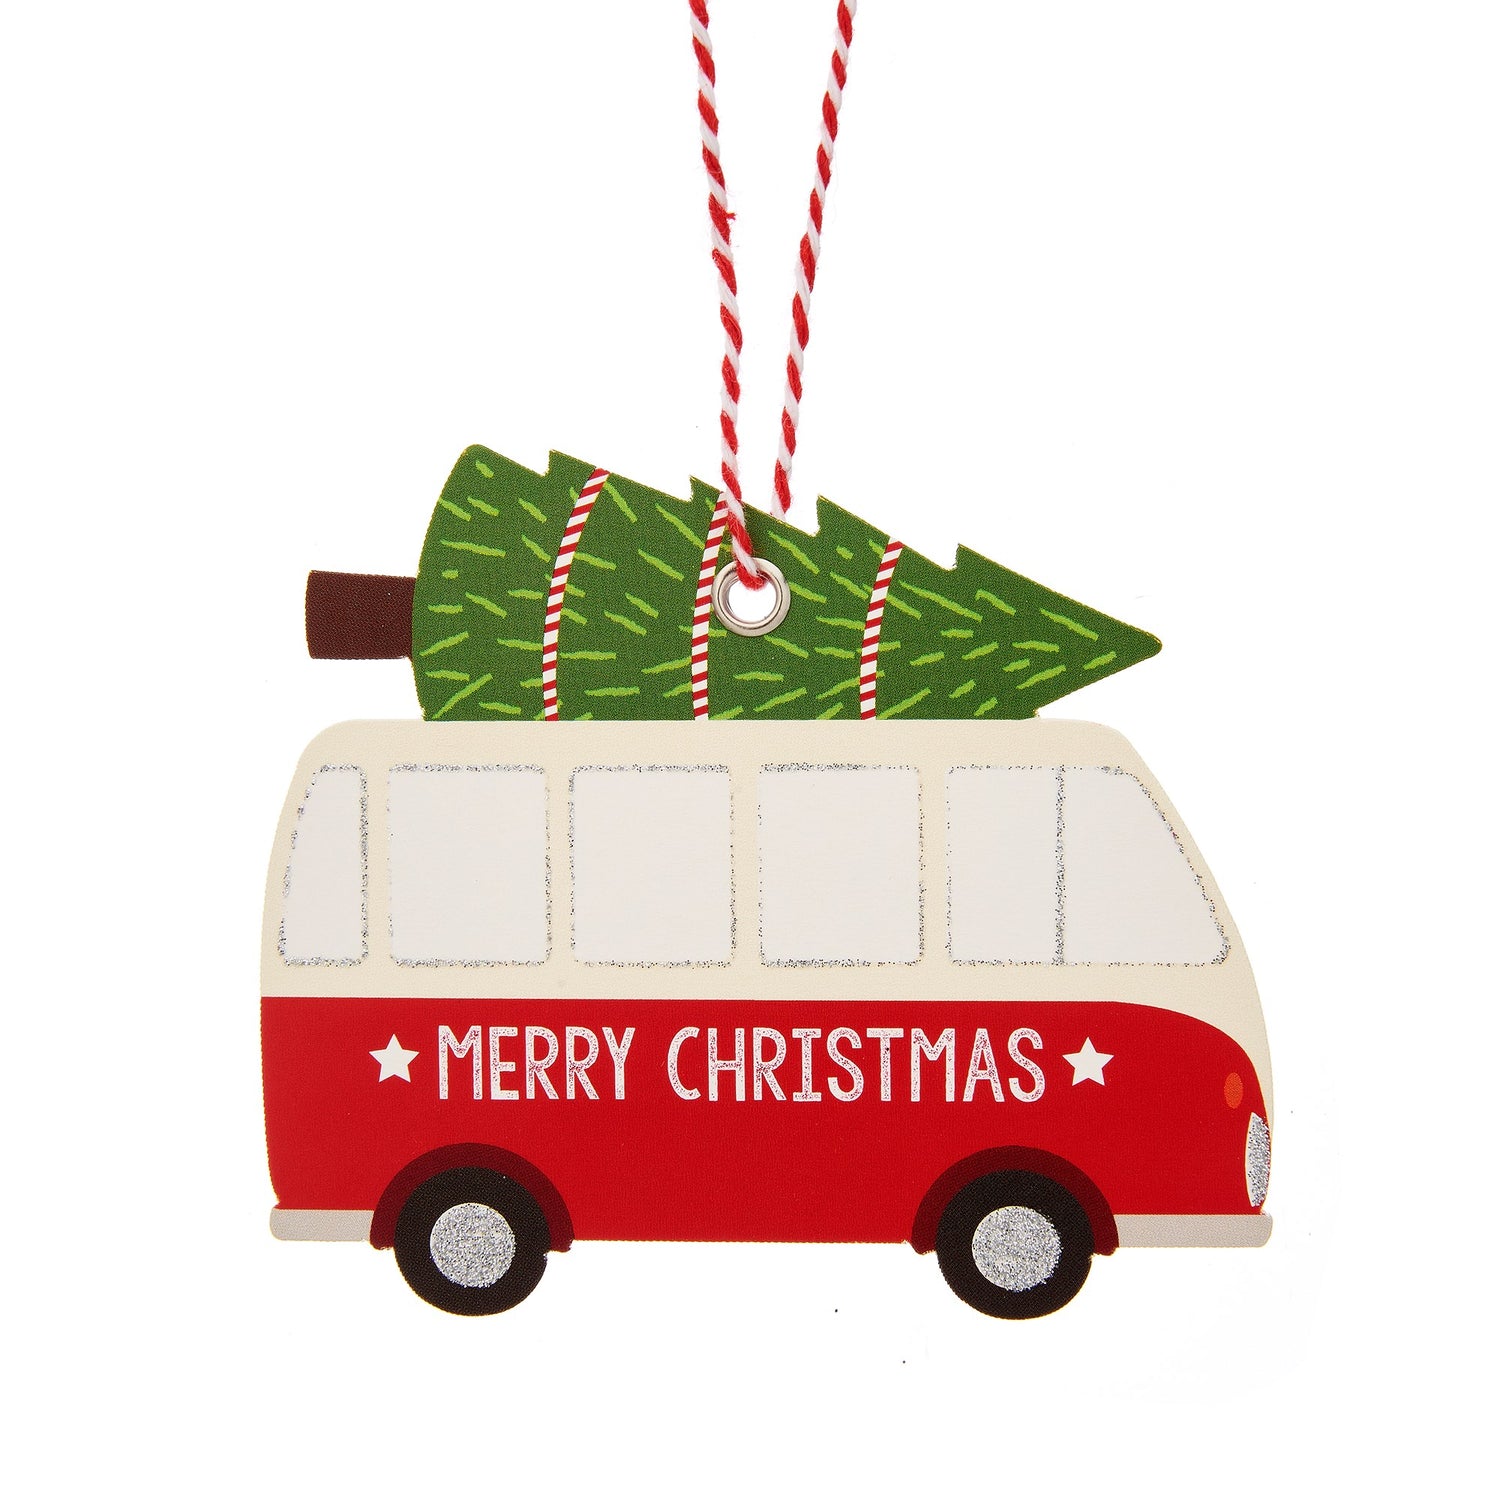 Retro camper van that says 'Merry Christmas' with a Christmas tree on the roof gift tags!